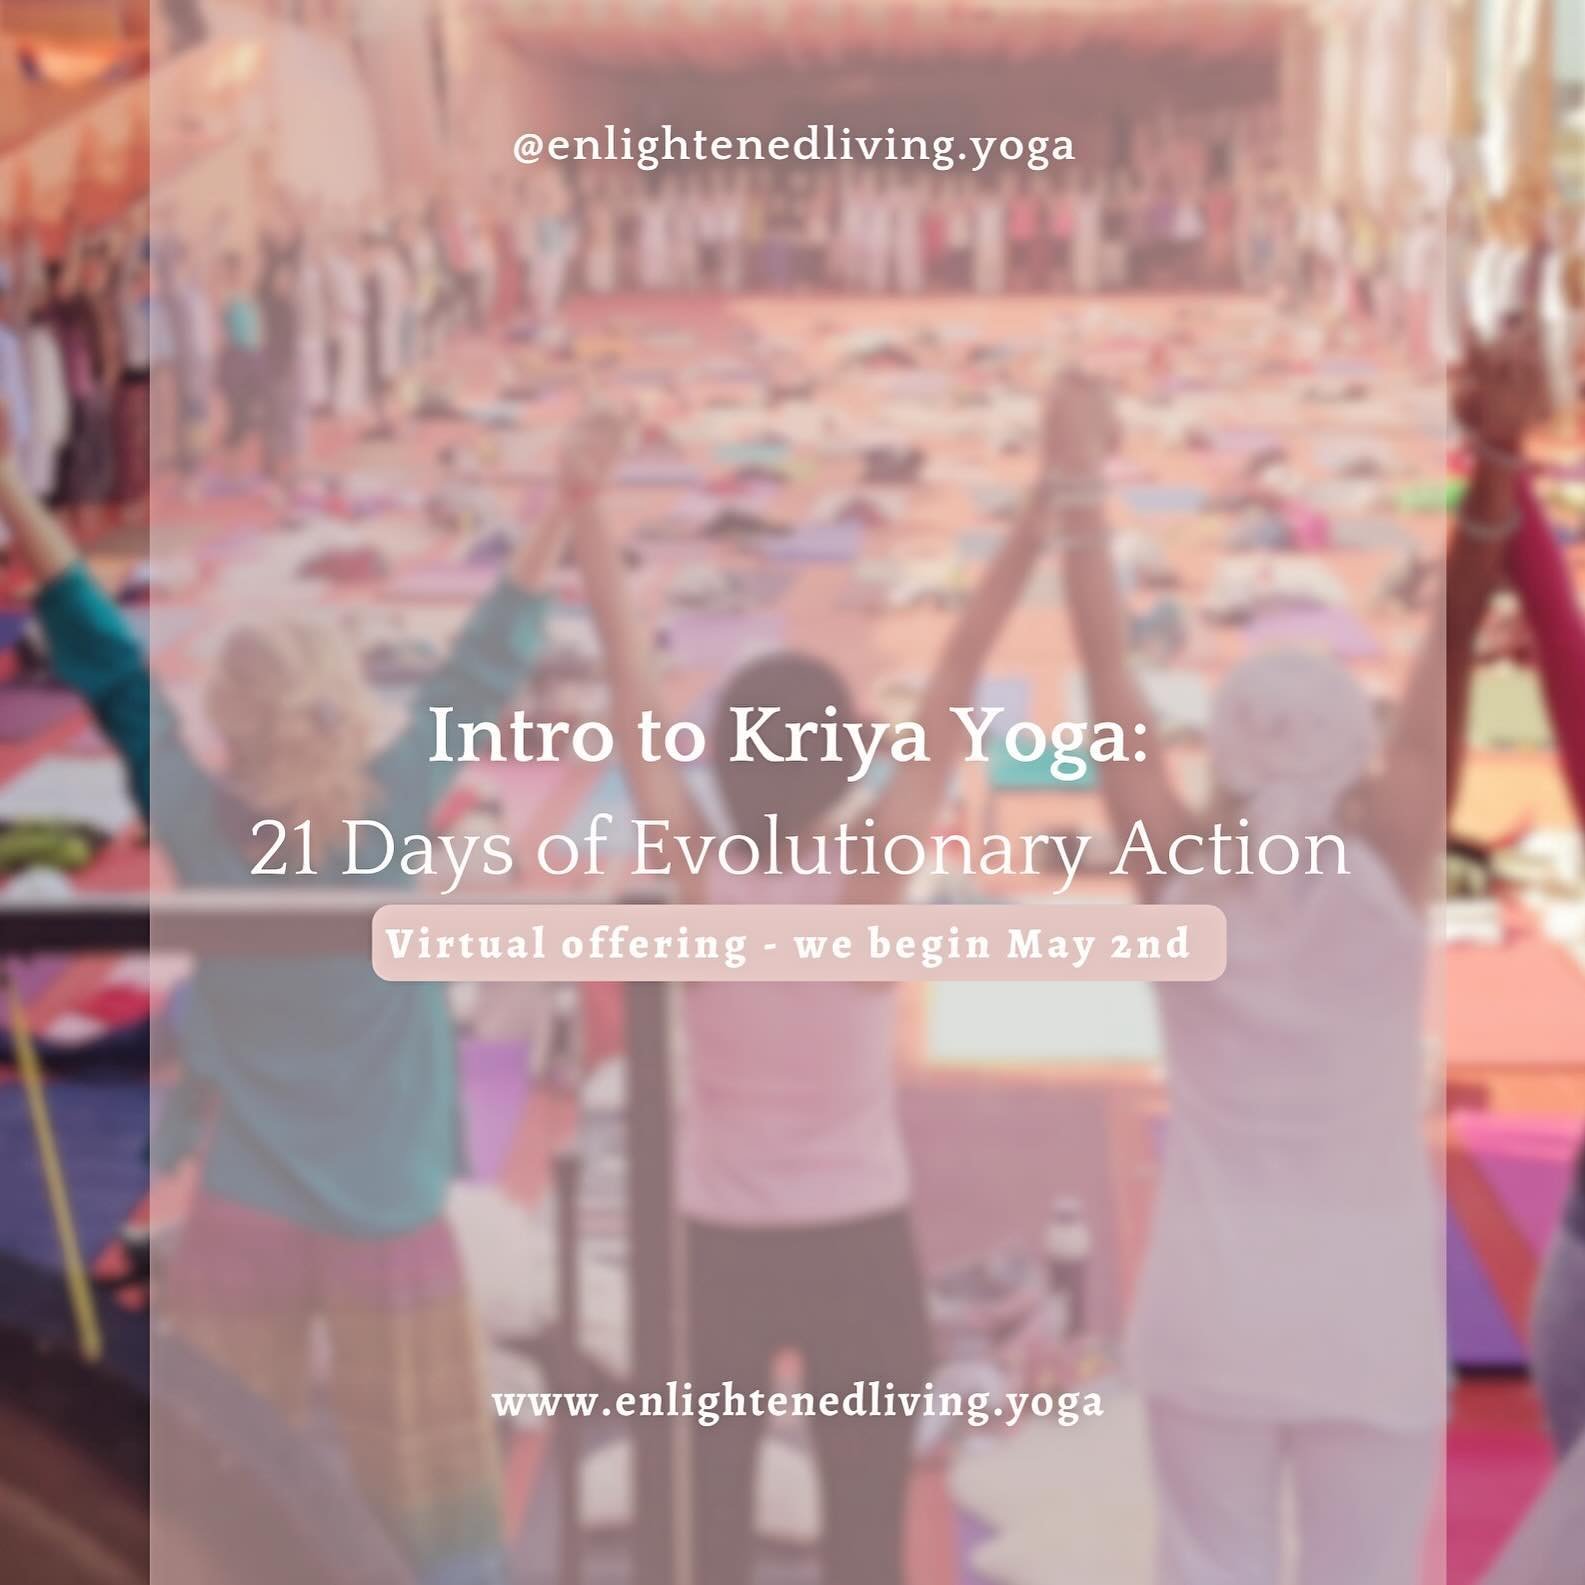 This program is for those seeking support in manifesting steady and stable spiritual growth. You will be initiated into a Kriya sadhana practice with the intention to connect with your generous heart, creating space for the experience of grace, joy, 